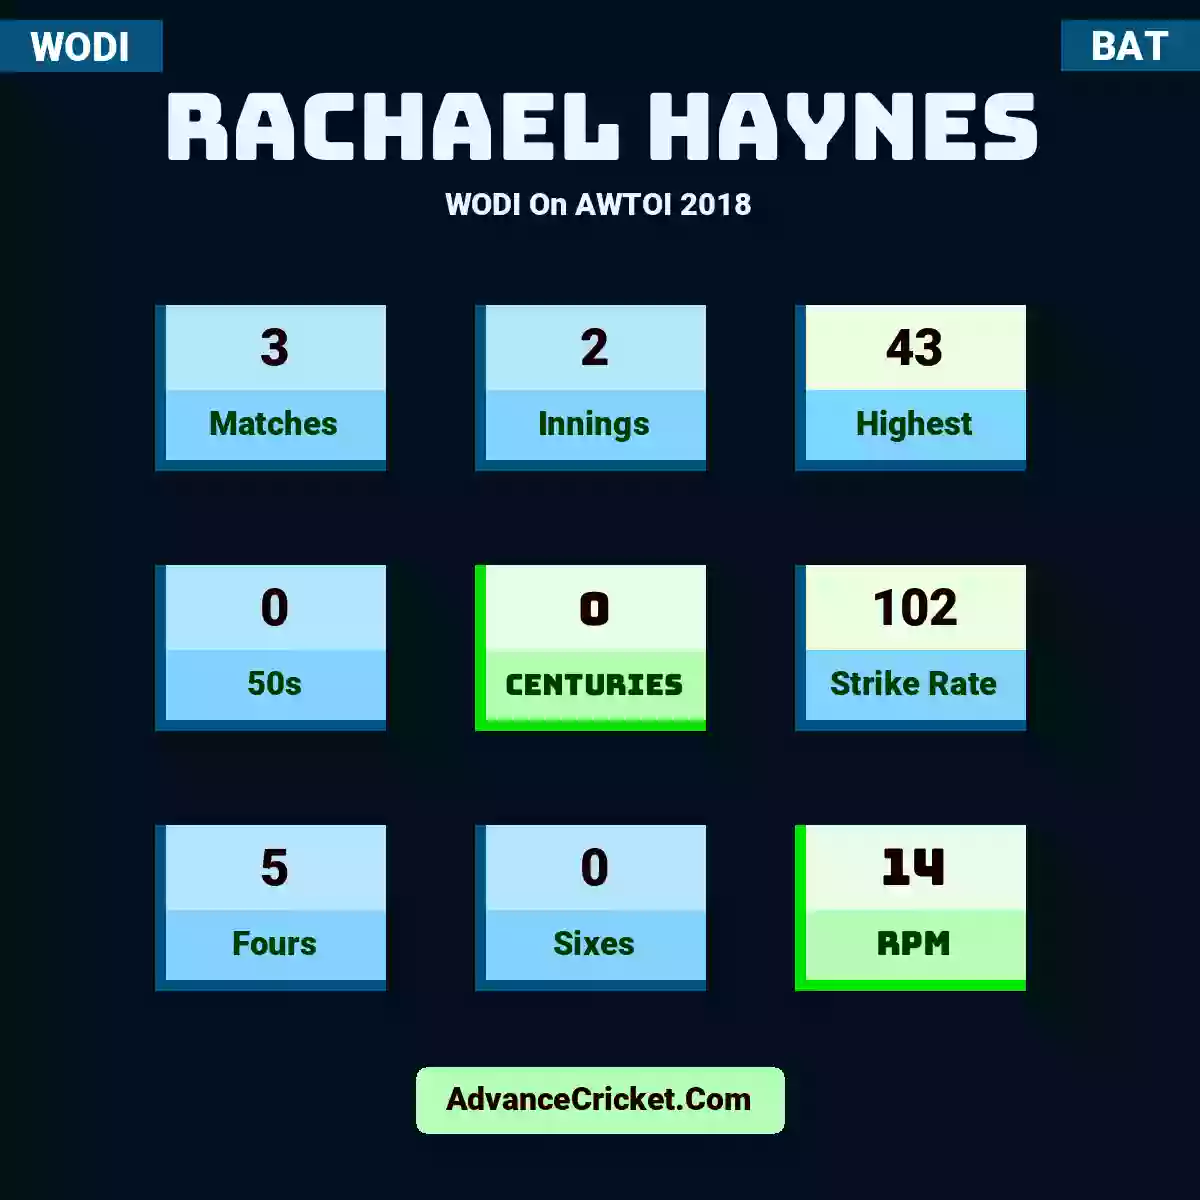 Rachael Haynes WODI  On AWTOI 2018, Rachael Haynes played 3 matches, scored 43 runs as highest, 0 half-centuries, and 0 centuries, with a strike rate of 102. R.Haynes hit 5 fours and 0 sixes, with an RPM of 14.